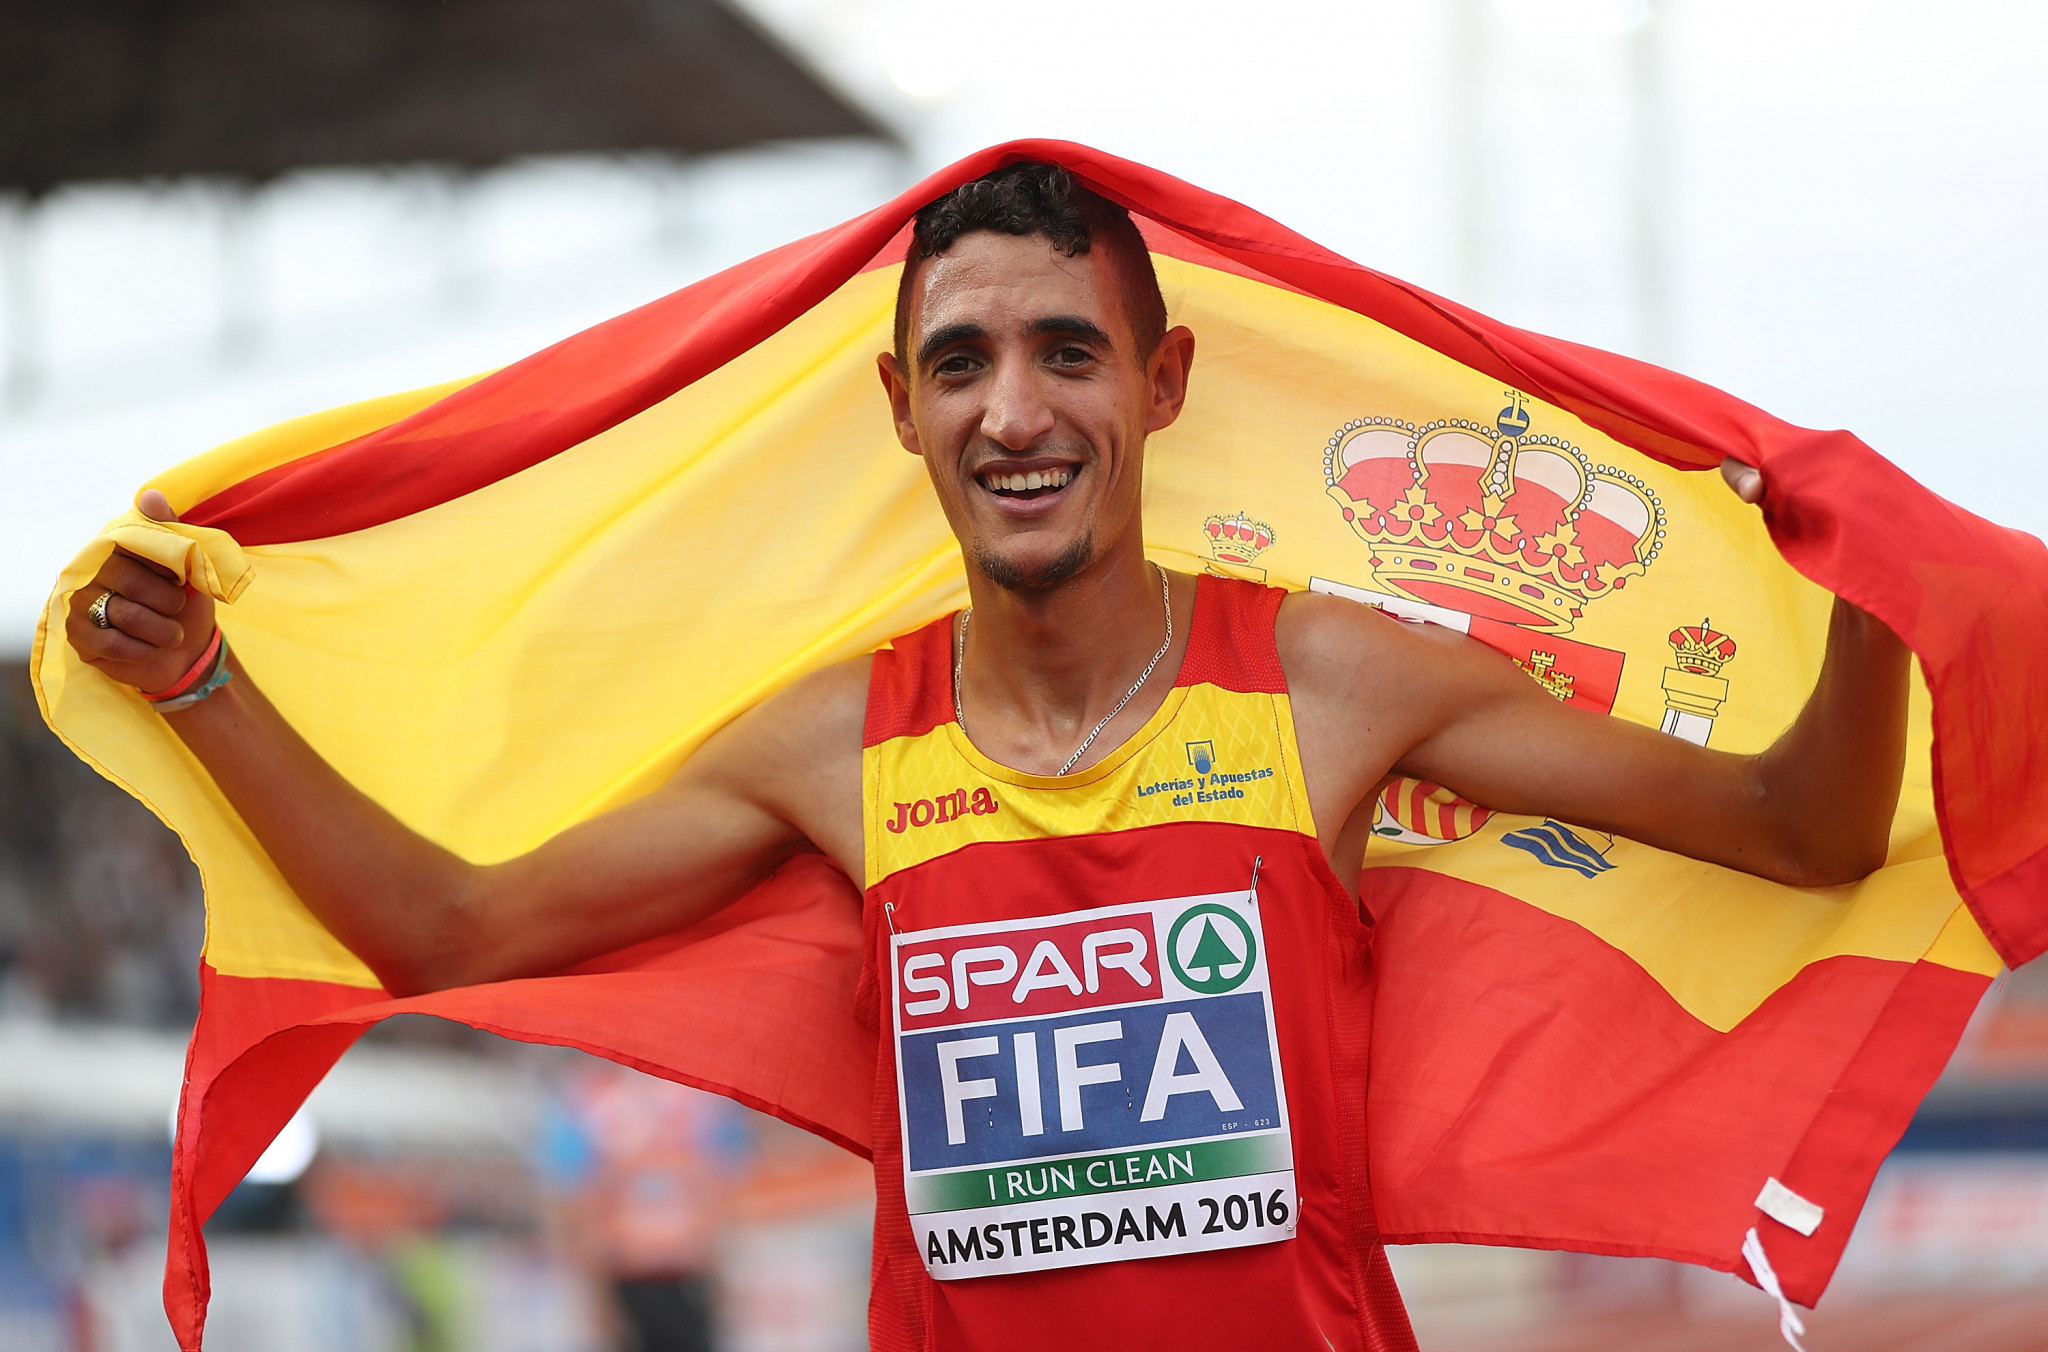 Spanish long-distance runner Fifa arrested in doping probe